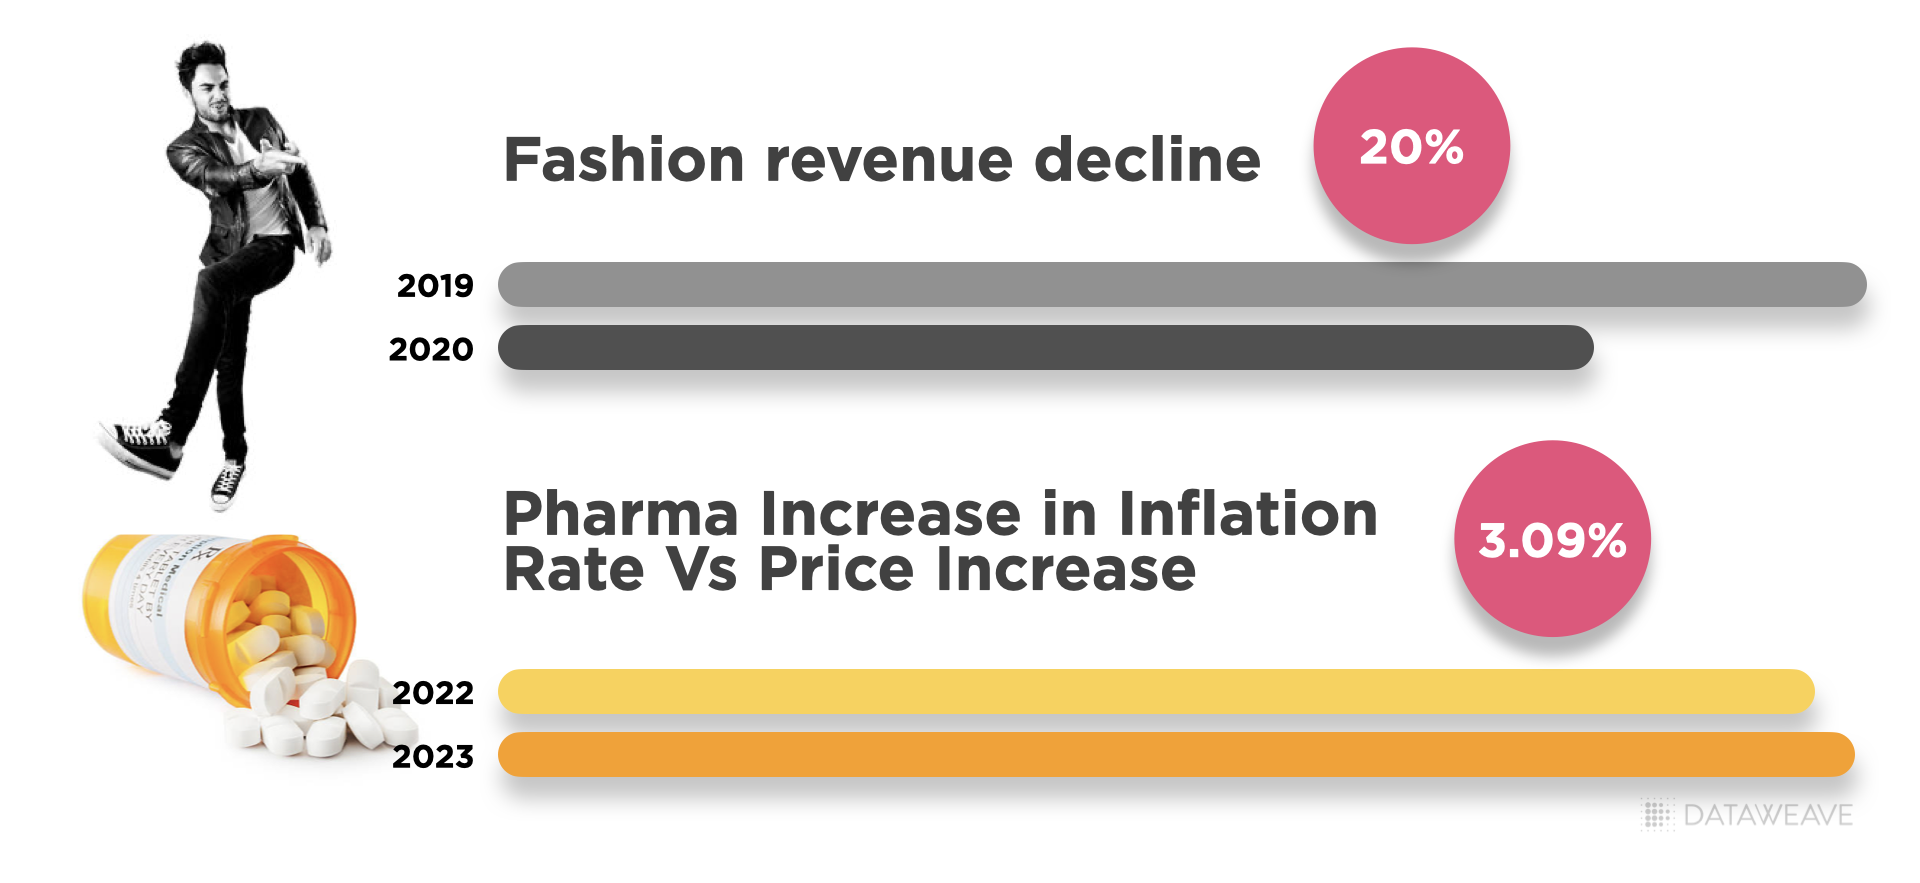 Inflation for Fashion & Pharma Industry 